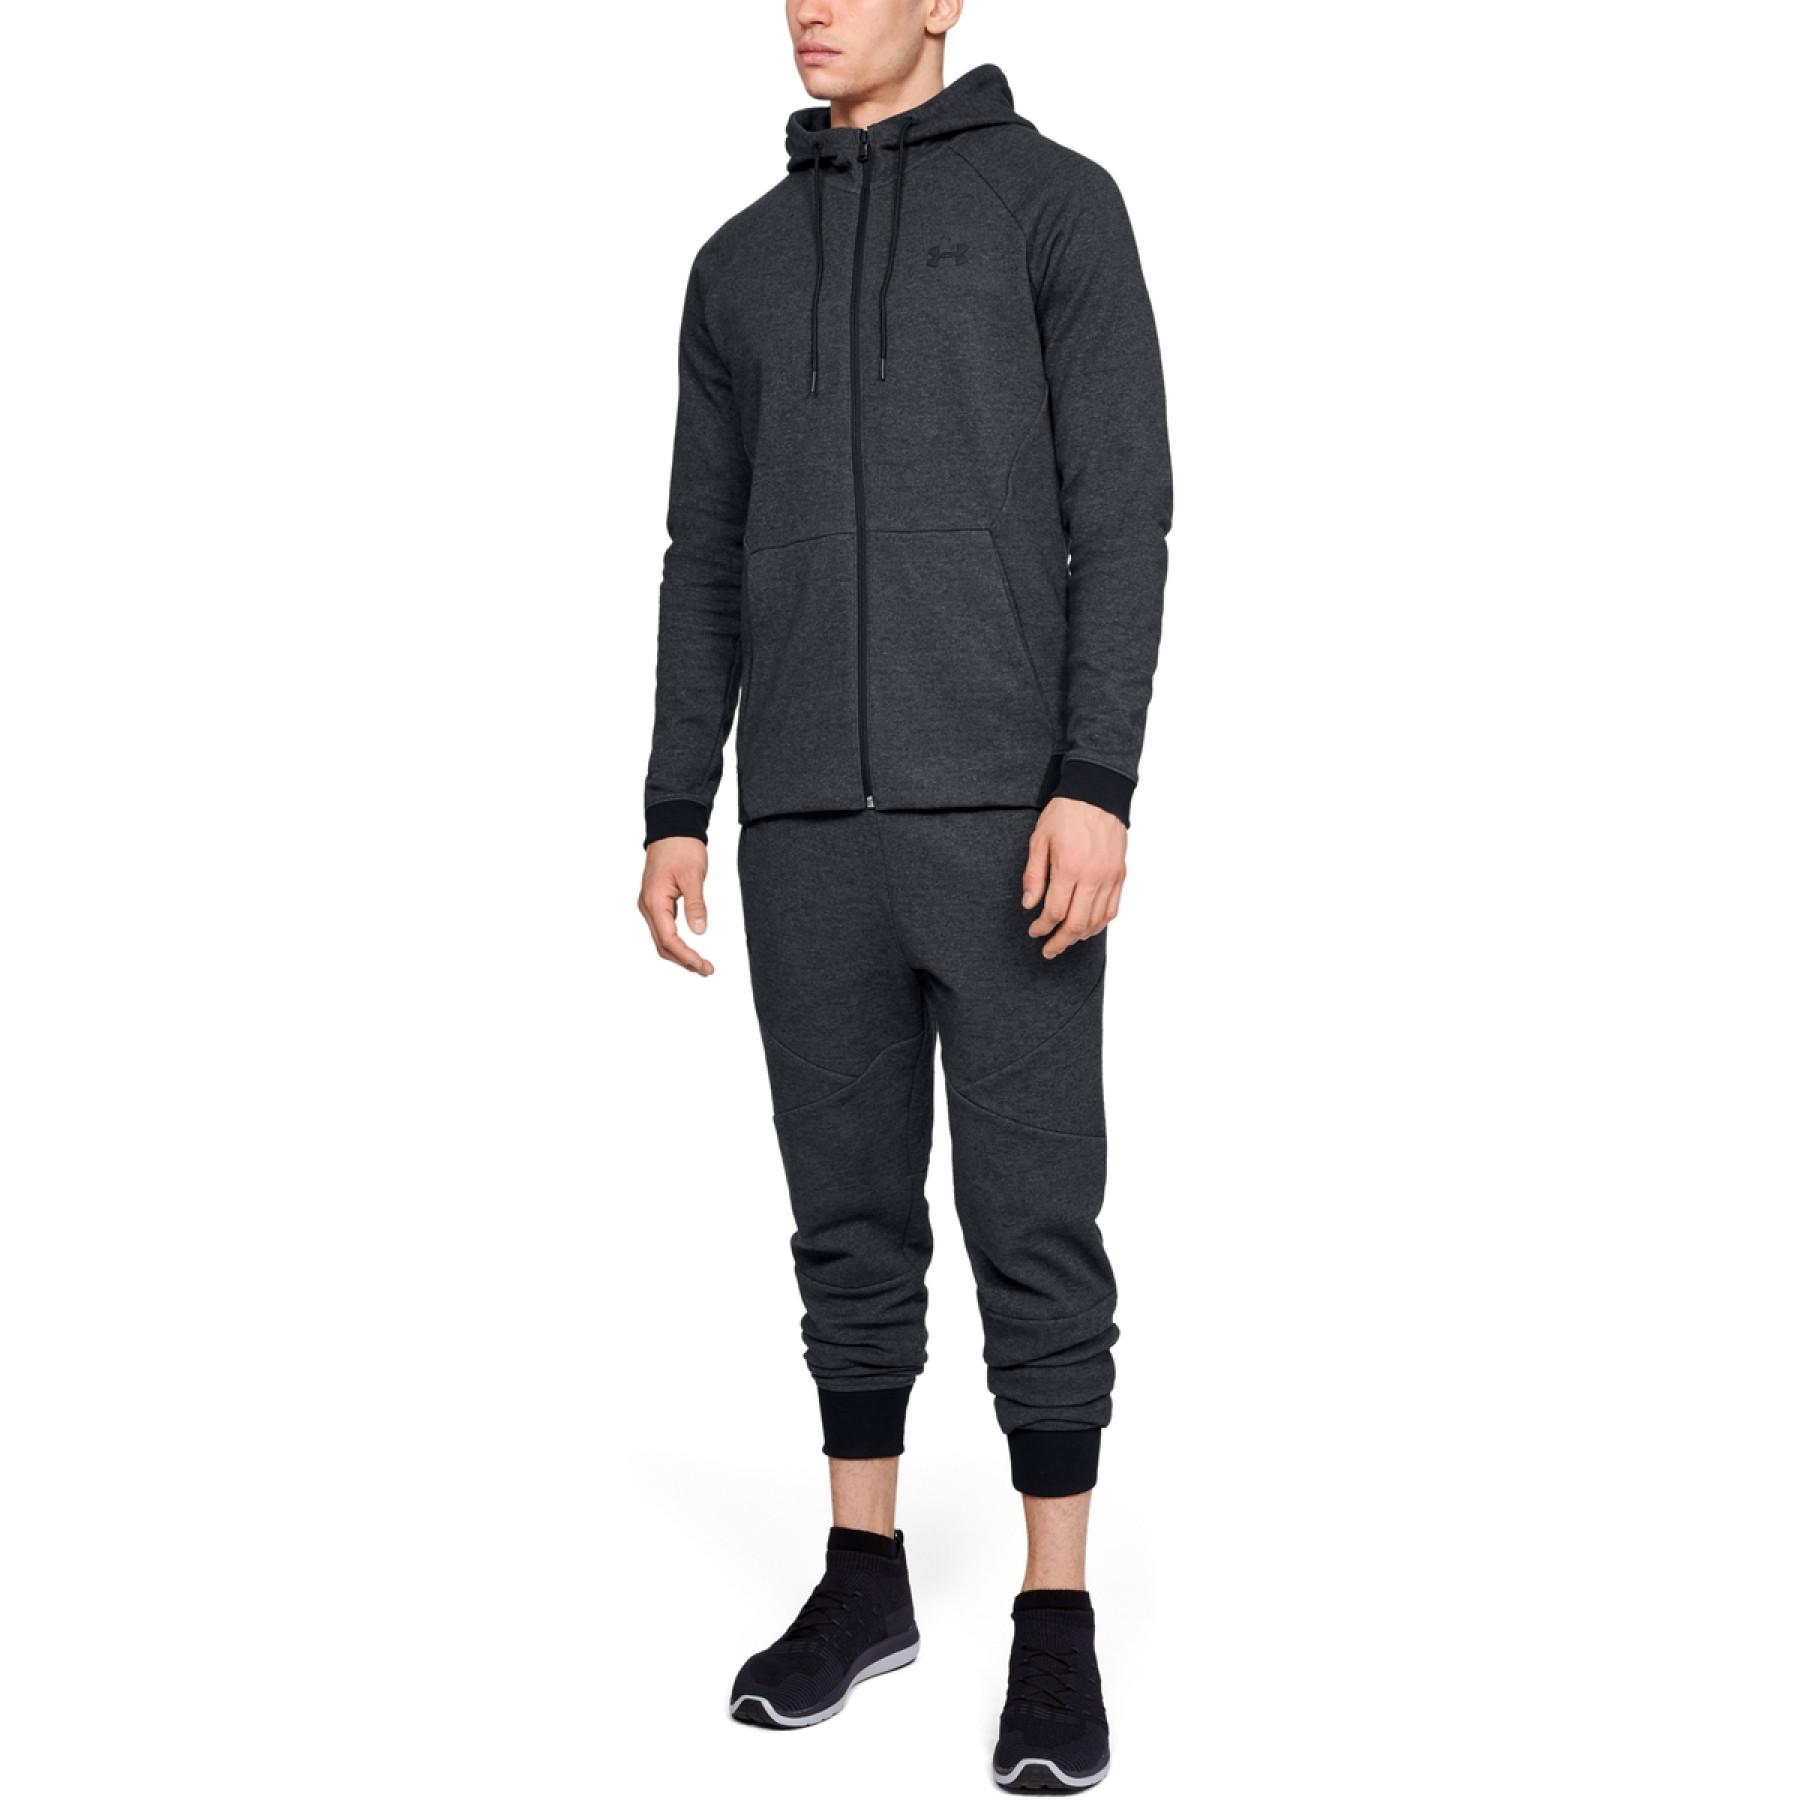 Jas Under Armour Unstoppable 2X Full Zip